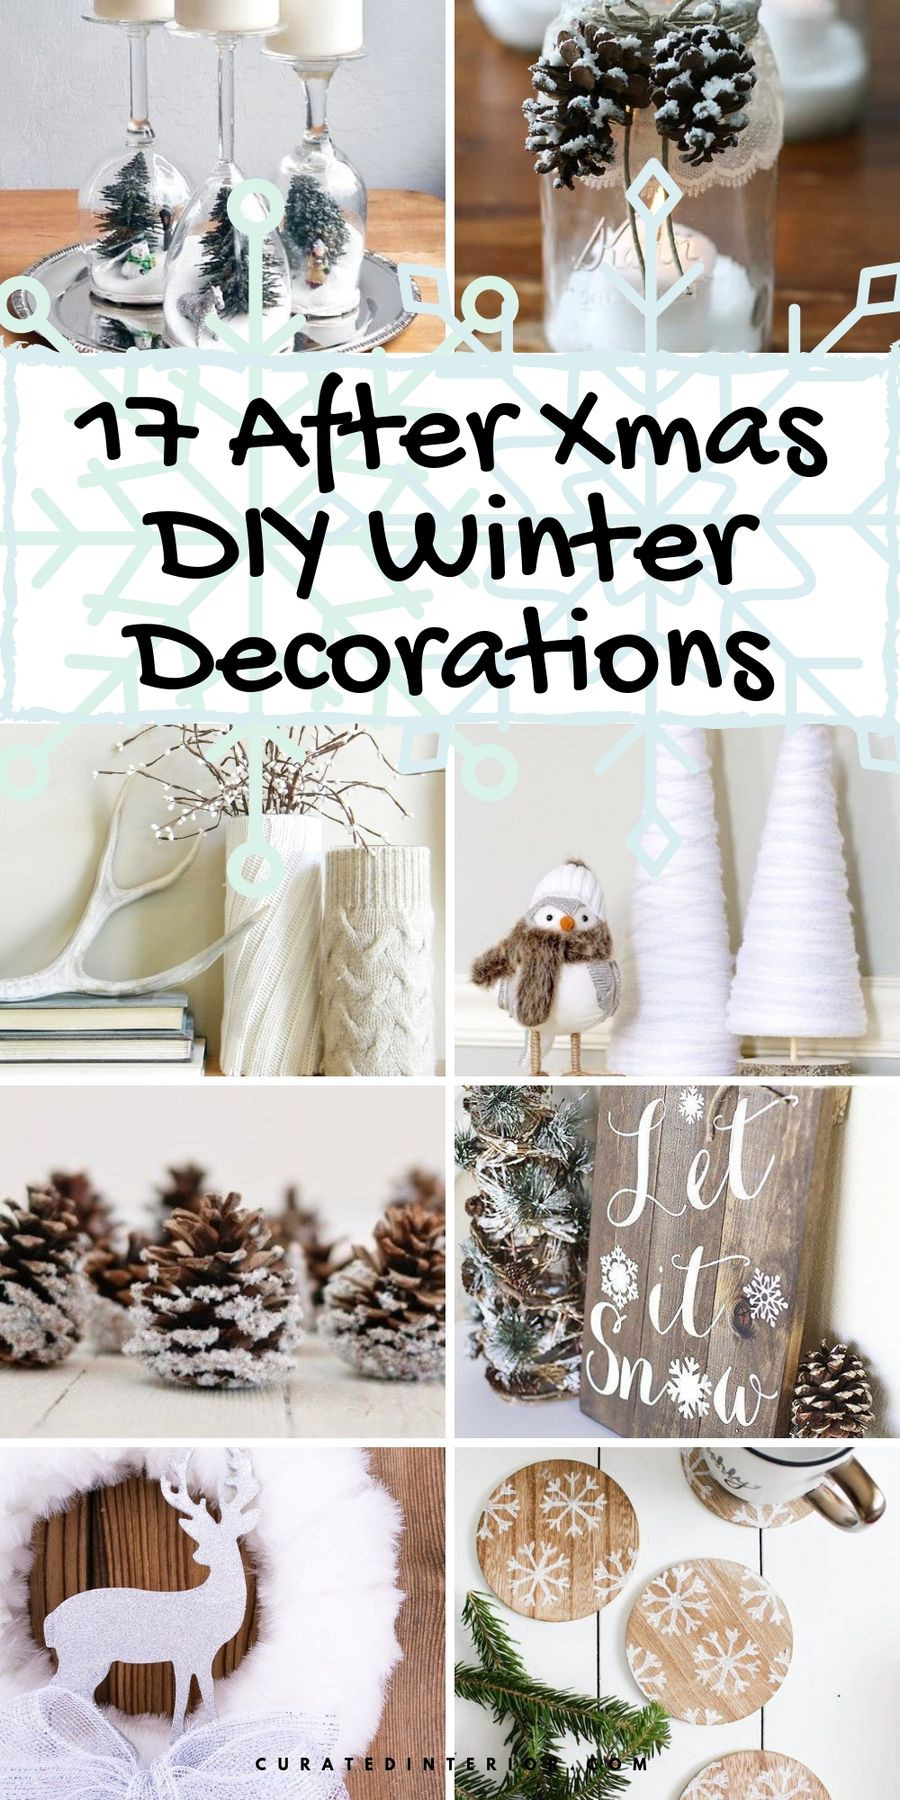 Winter Decor DIY
 17 DIY Winter Decorations for After Christmas Decorating